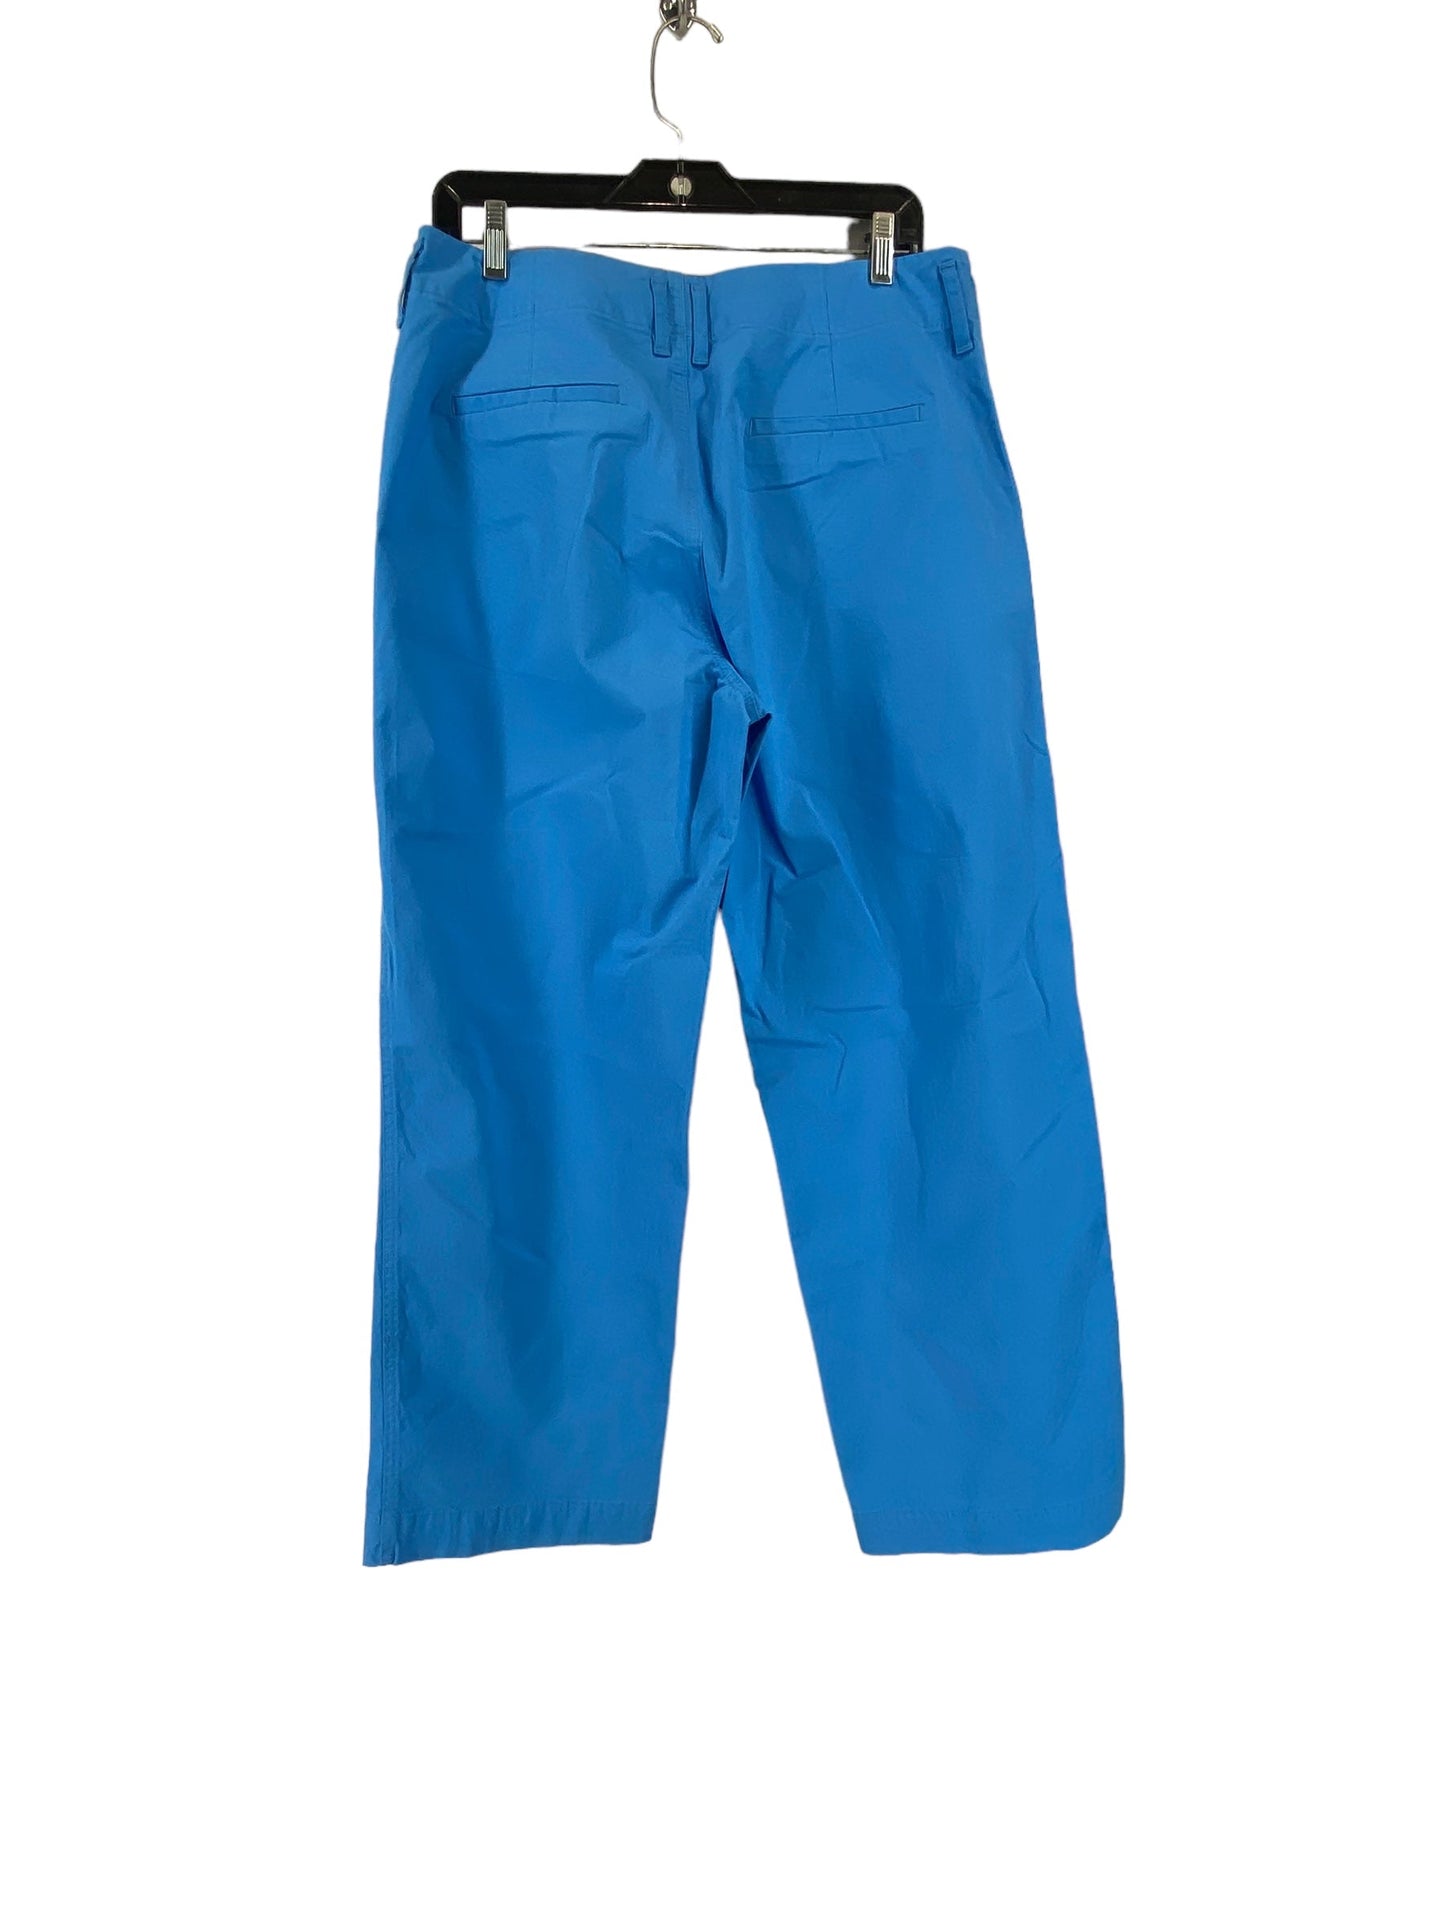 Blue Pants Chinos & Khakis A New Day, Size 10